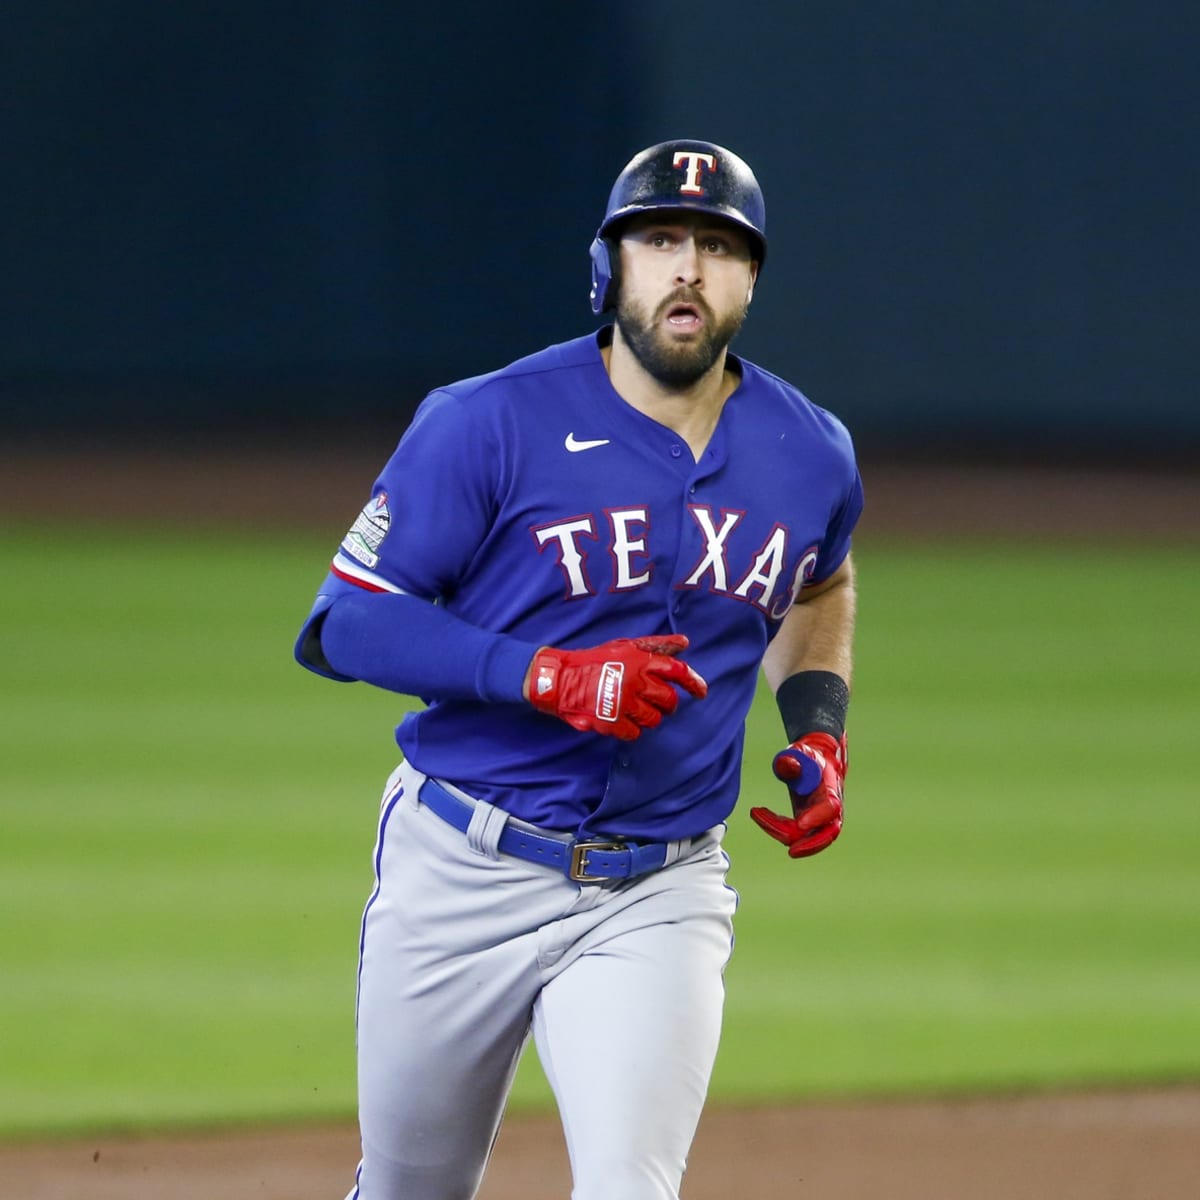 Yankees reach deal to get slugger Joey Gallo from Rangers - The Boston Globe